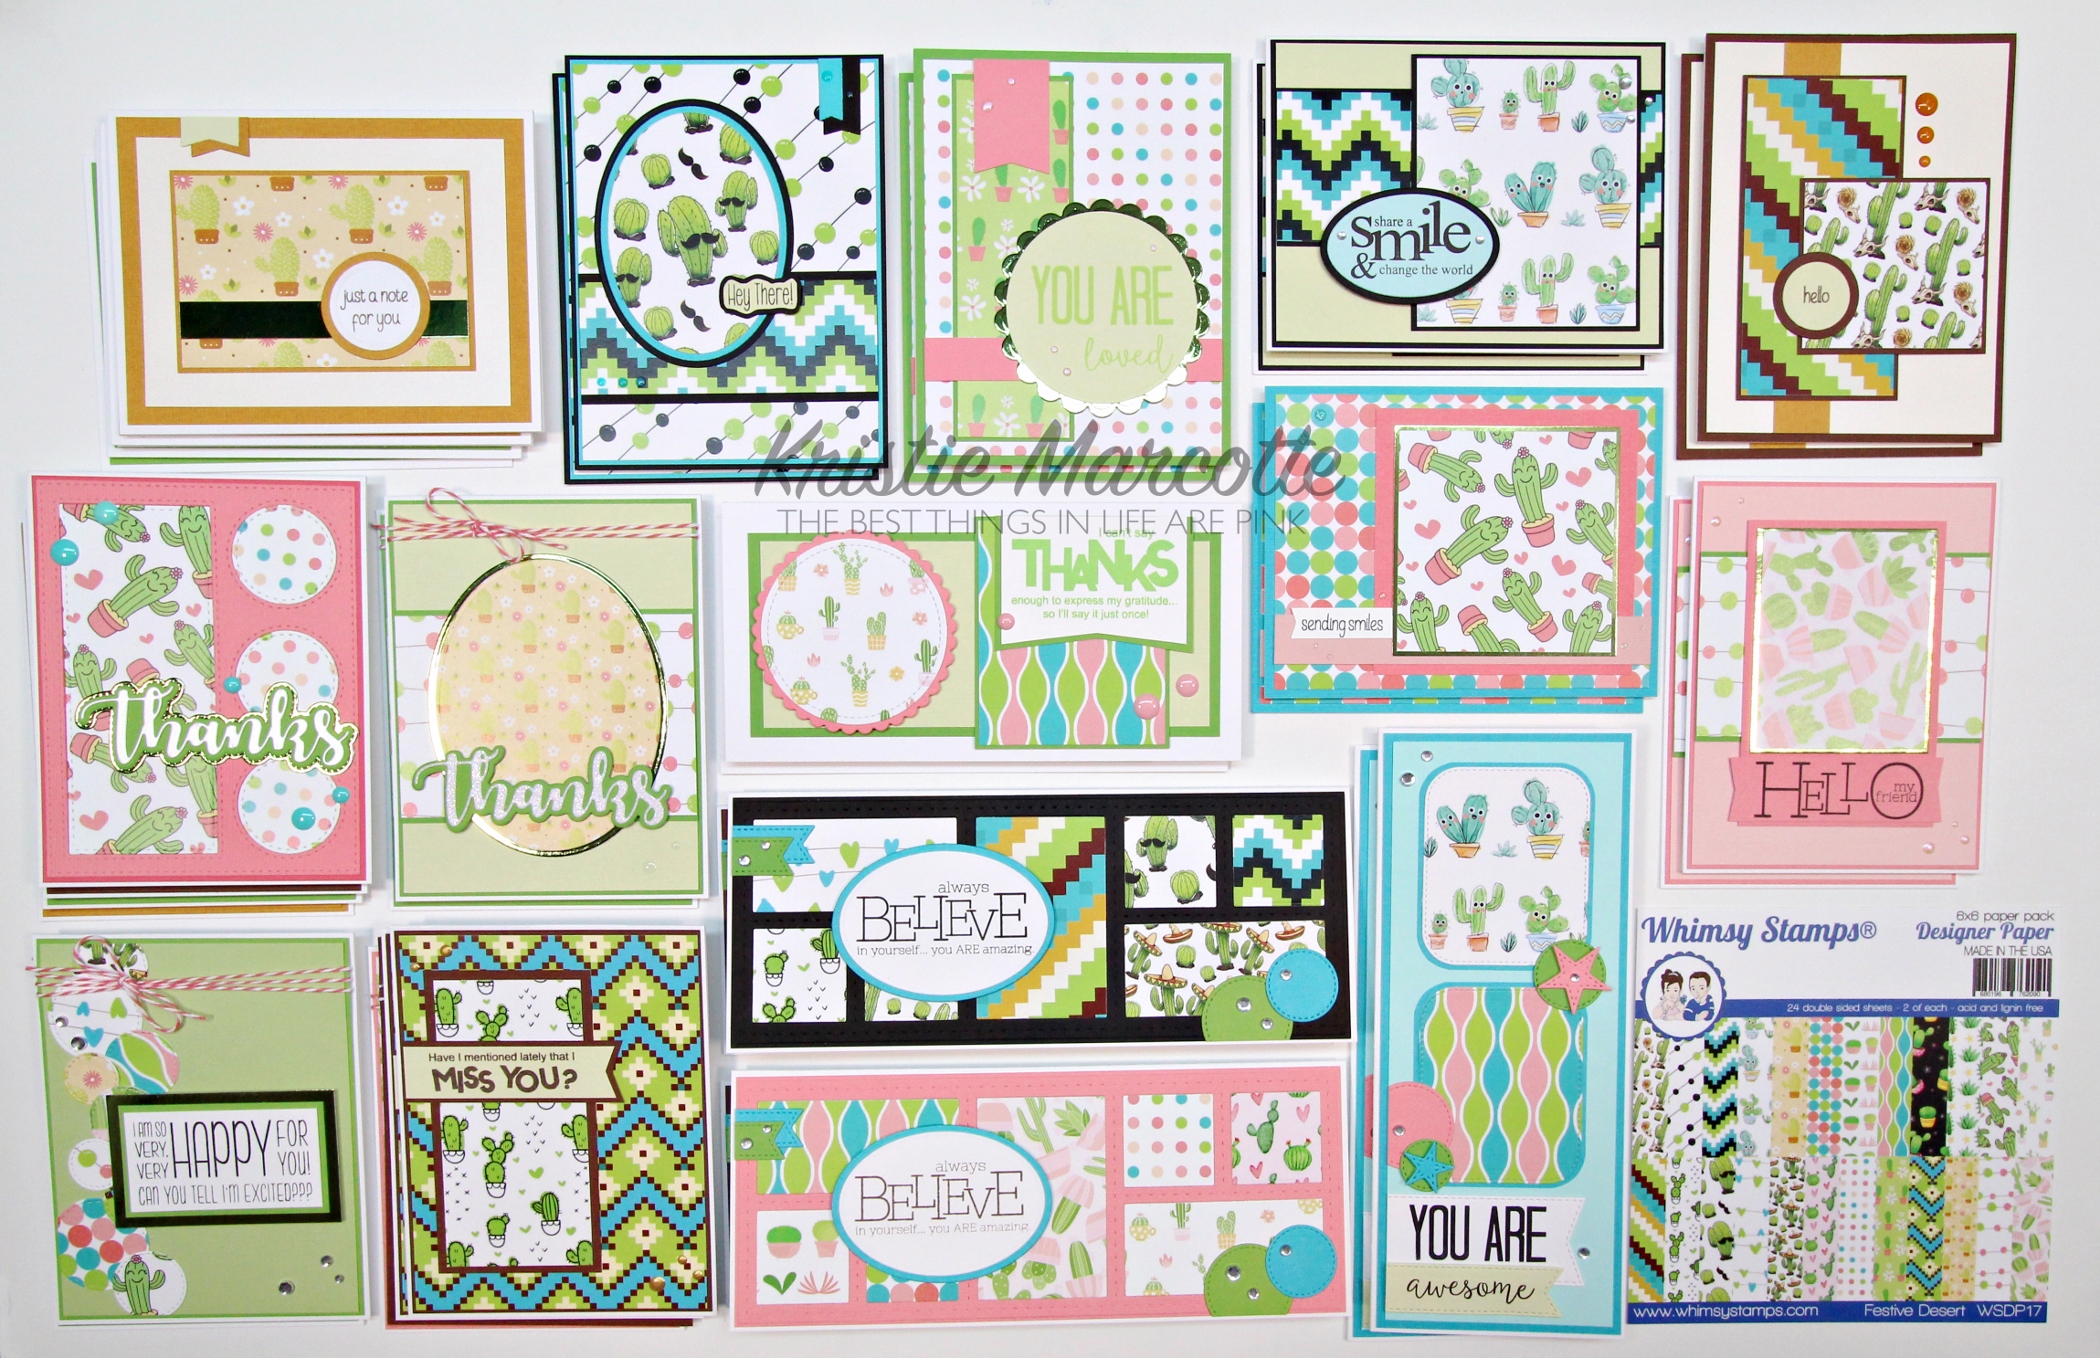 Whimsy Stamps – Festive Desert – 36 cards from one 6×6 paper pad